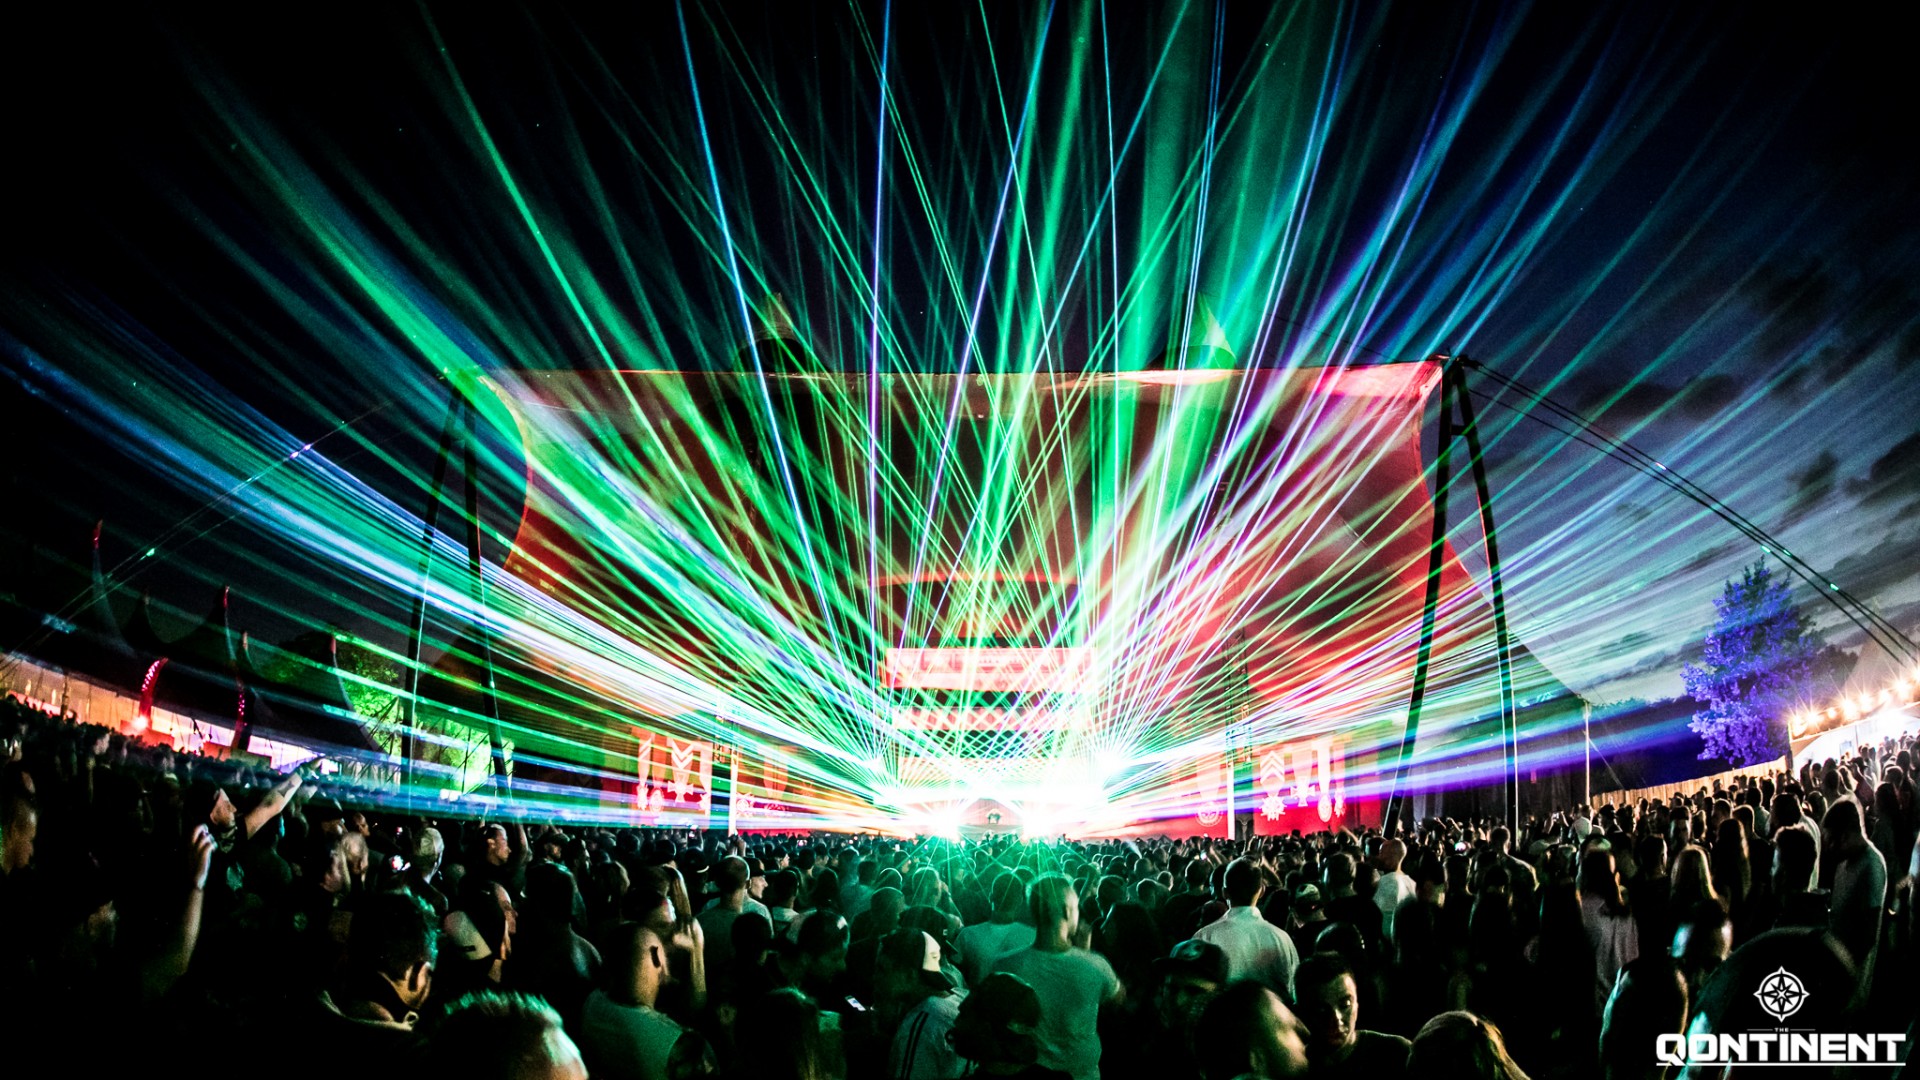 The Qontinent Festivals Stages Colorful Lights Lasers Crowds Photography 1920x1080